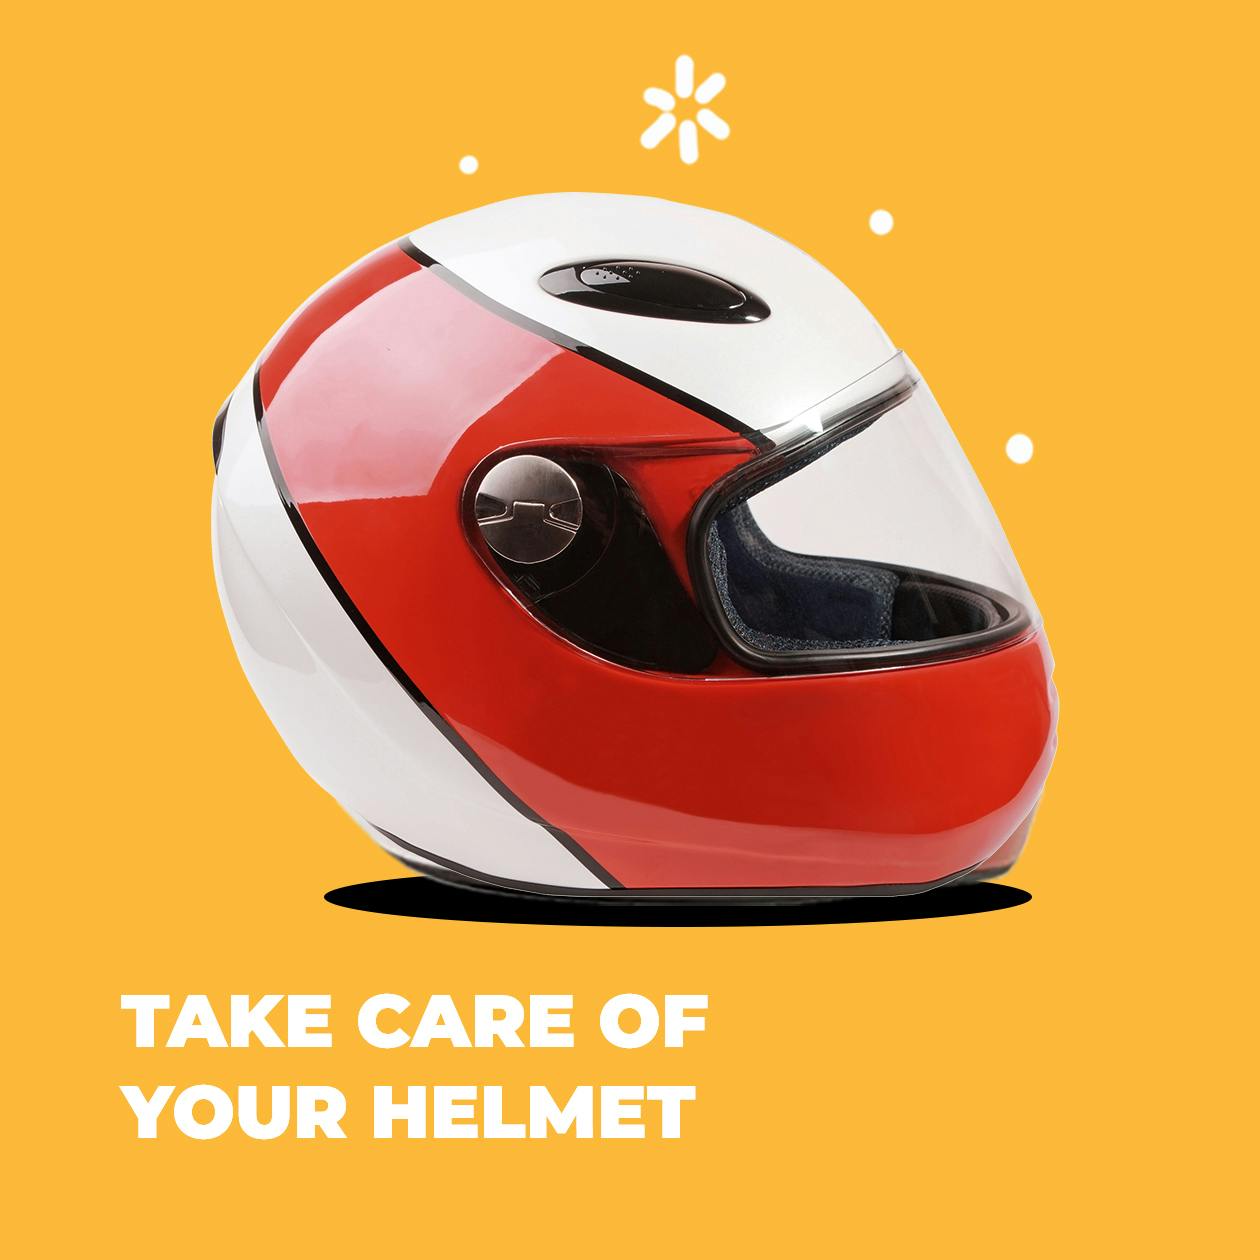 Take care of your helmet